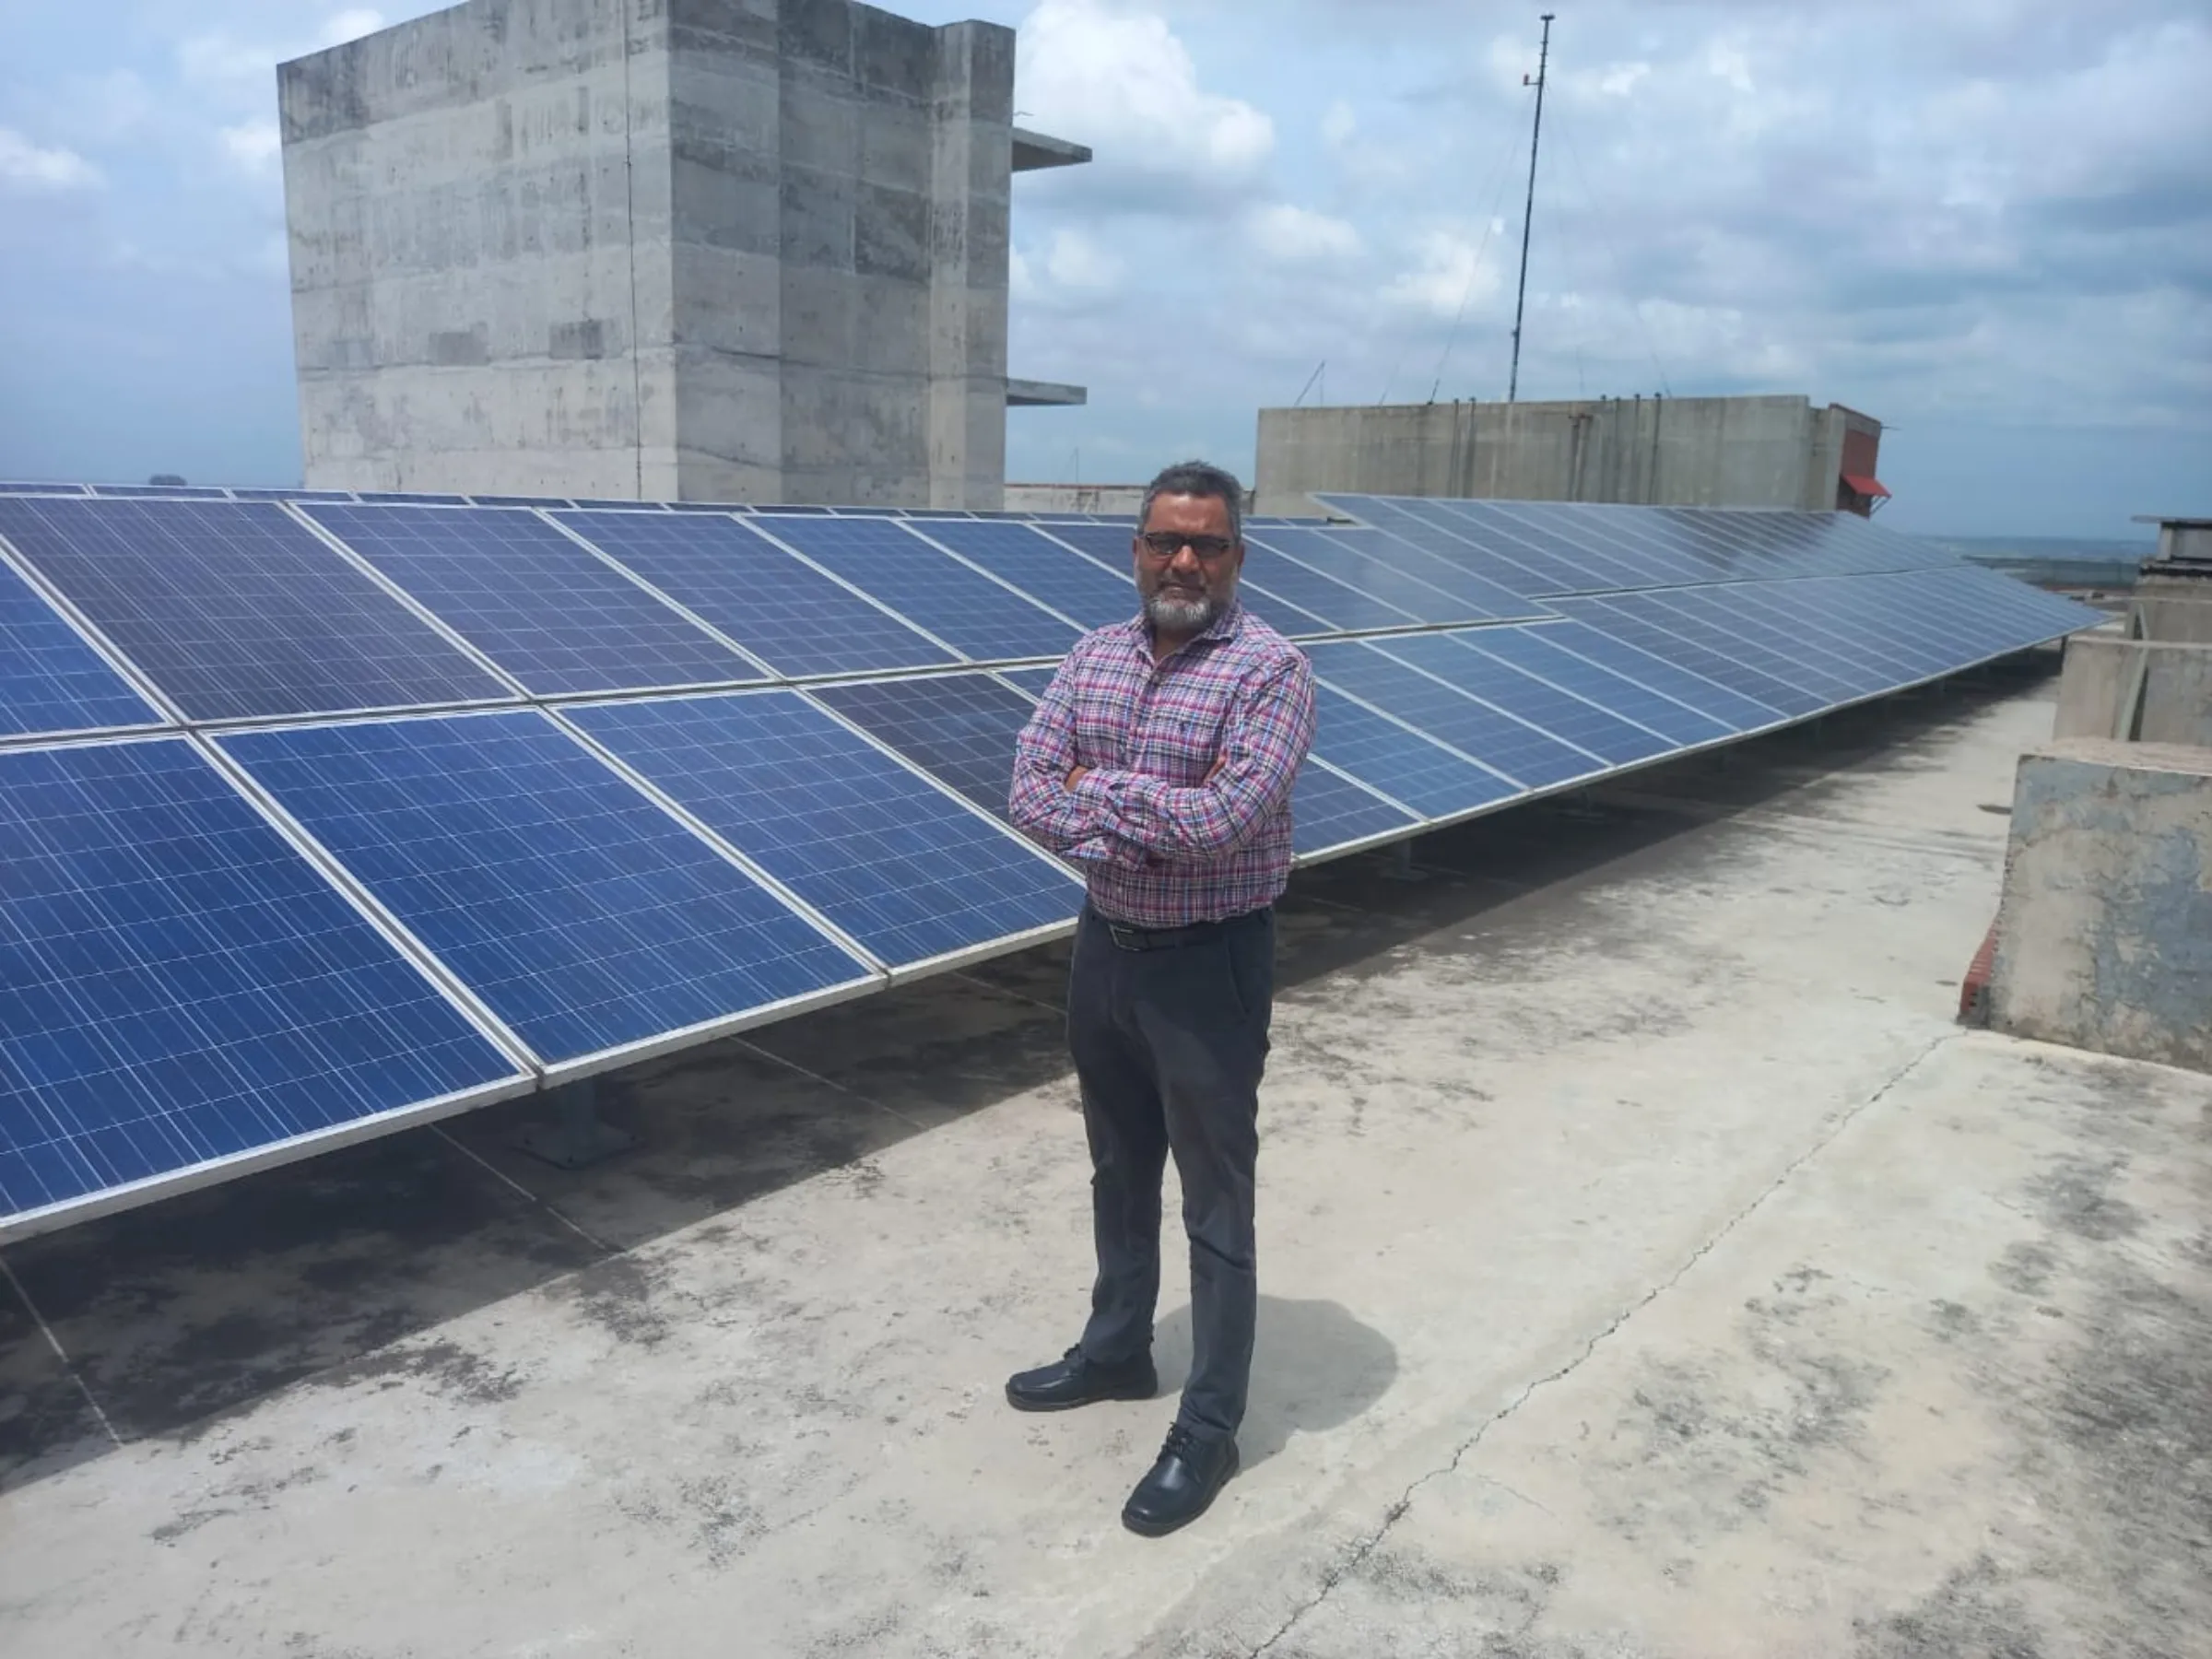 A man stands with his arms folded in front of solar panels on a rooftop